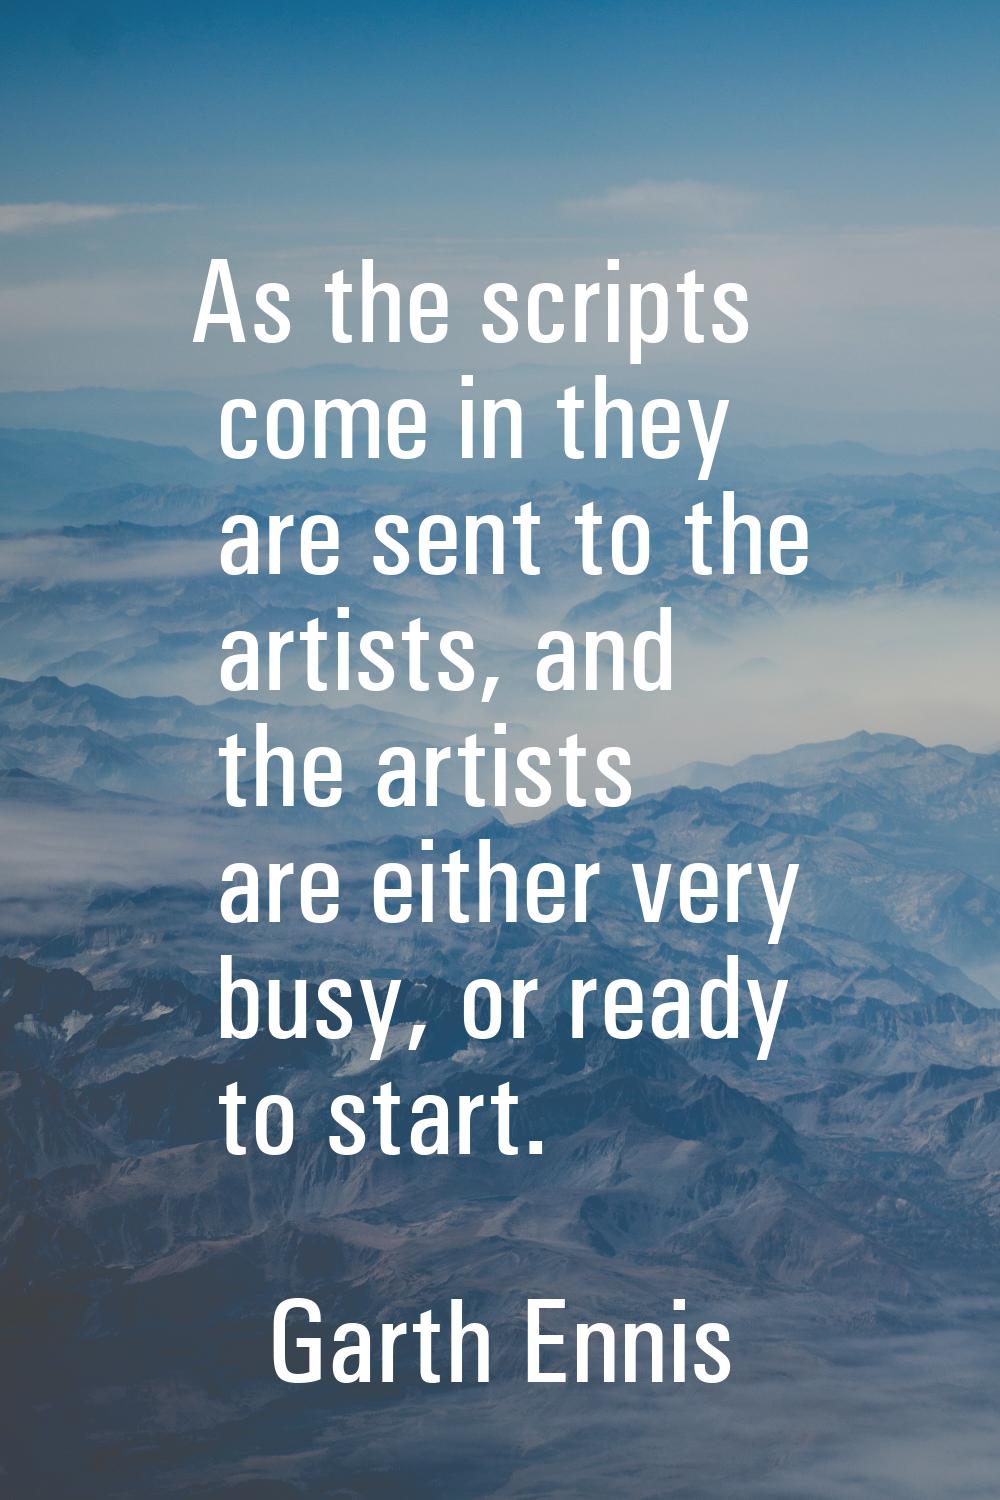 As the scripts come in they are sent to the artists, and the artists are either very busy, or ready